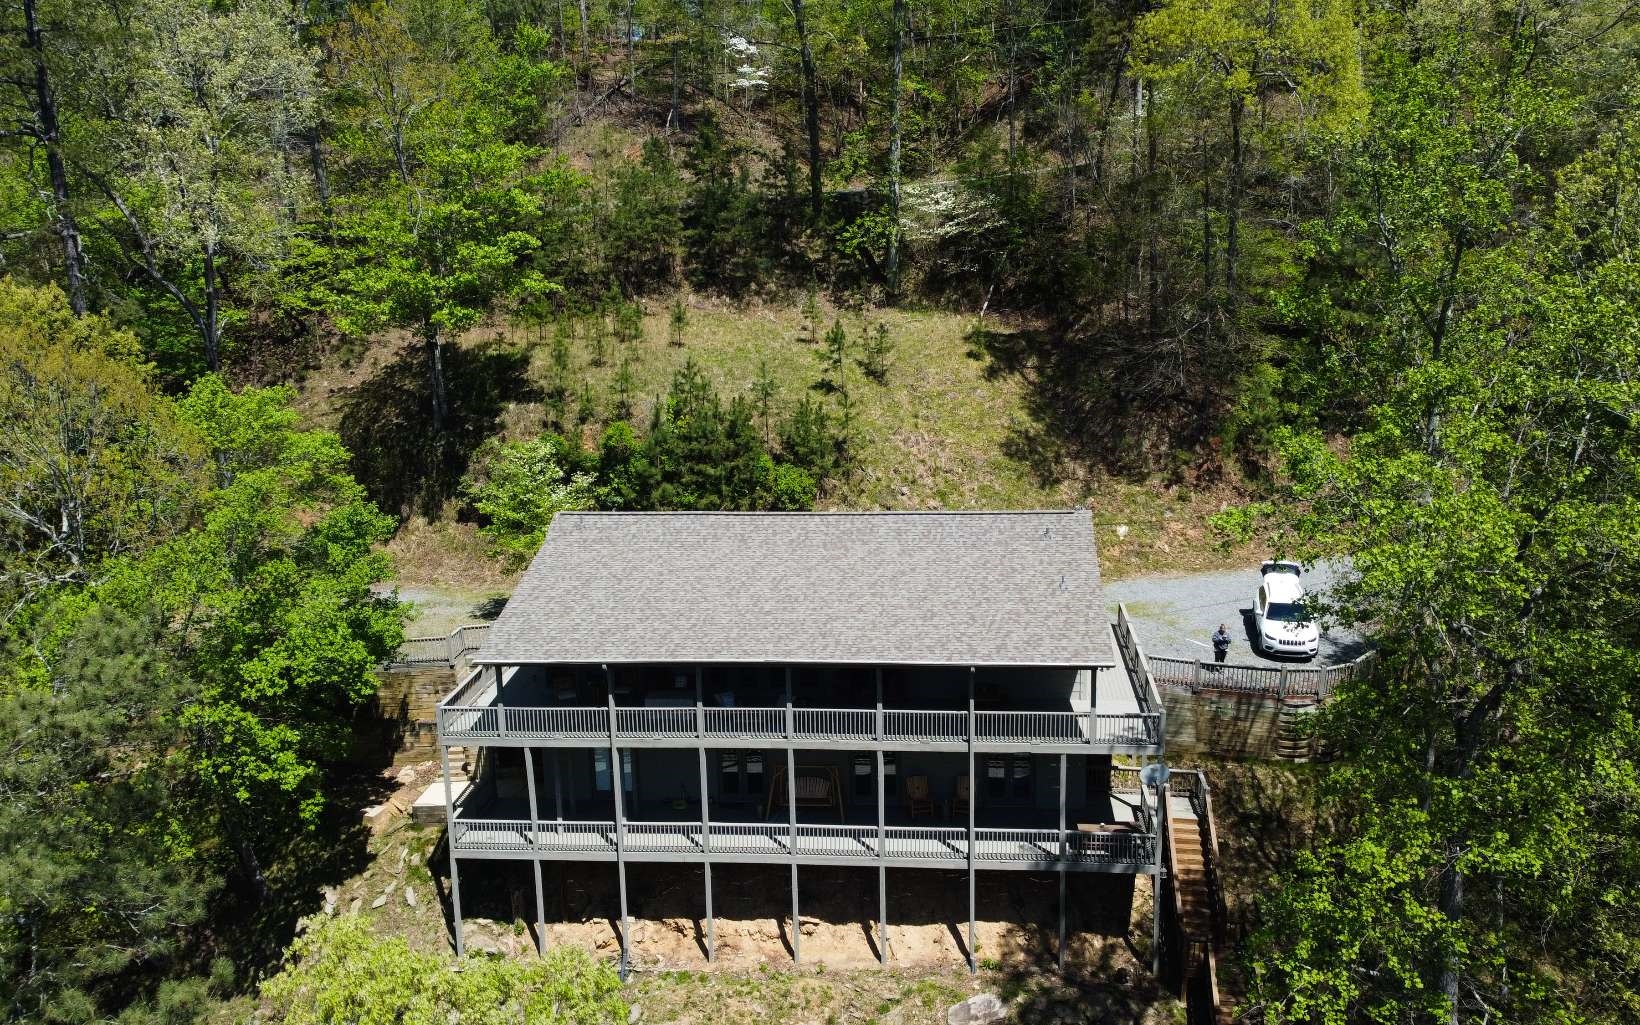 ROARING RIVER-FRONT RETREAT IN THE NORTH GA MOUNTAINS! This sizable and spectacular home will beckon you with MAJESTIC VIEWS and over 200 FEET OF COOSAWATTEE RIVER FRONTAGE. The STEPLESS ENTRY of the home’s main level opens to the fabulously flowing, OPEN-CONCEPT footprint, complete with gleaming hardwoods, soaring ceilings, and generous windows, allowing natural lighting to infuse the spaces.The living room is adorned with a romantic, floor-to-ceiling FIREPLACE as the room’s focal point, which is beautifully offset by handsome BEAMS. The bright and airy kitchen features sleek, white cabinetry met with dazzling granite countertops, and stainless appliance package in place. Marvelous MAIN-LEVEL OWNER’S RETREAT with SPA-INSPIRED ENSUITE, including double vanities, jetted tub, and MASSIVE, WALK-IN TILE SHOWER with arched entry. The additional main-level bedroom is serviced by a full bath with gorgeous tile shower with seamless glass enclosure. The lower level is comprised of a generous GAME ROOM, complete with FIREPLACE and handy KITCHENETTE; 2 generously sized bedrooms; and 2 full baths with brilliant aureate hardware. This marvelous abode offers the natural beauty of the mountains and river without the decorating limitations of a traditional cabin. Expansive, WRAP AROUND DECKING is a storybook setting for entertaining and relaxing to the sound of RIVER MUSIC. Additional, RIVERSIDE SUNBATHING DECK is in place for summertime fun! Enjoy fantastic FISHING (trout, bass, brim, etc)